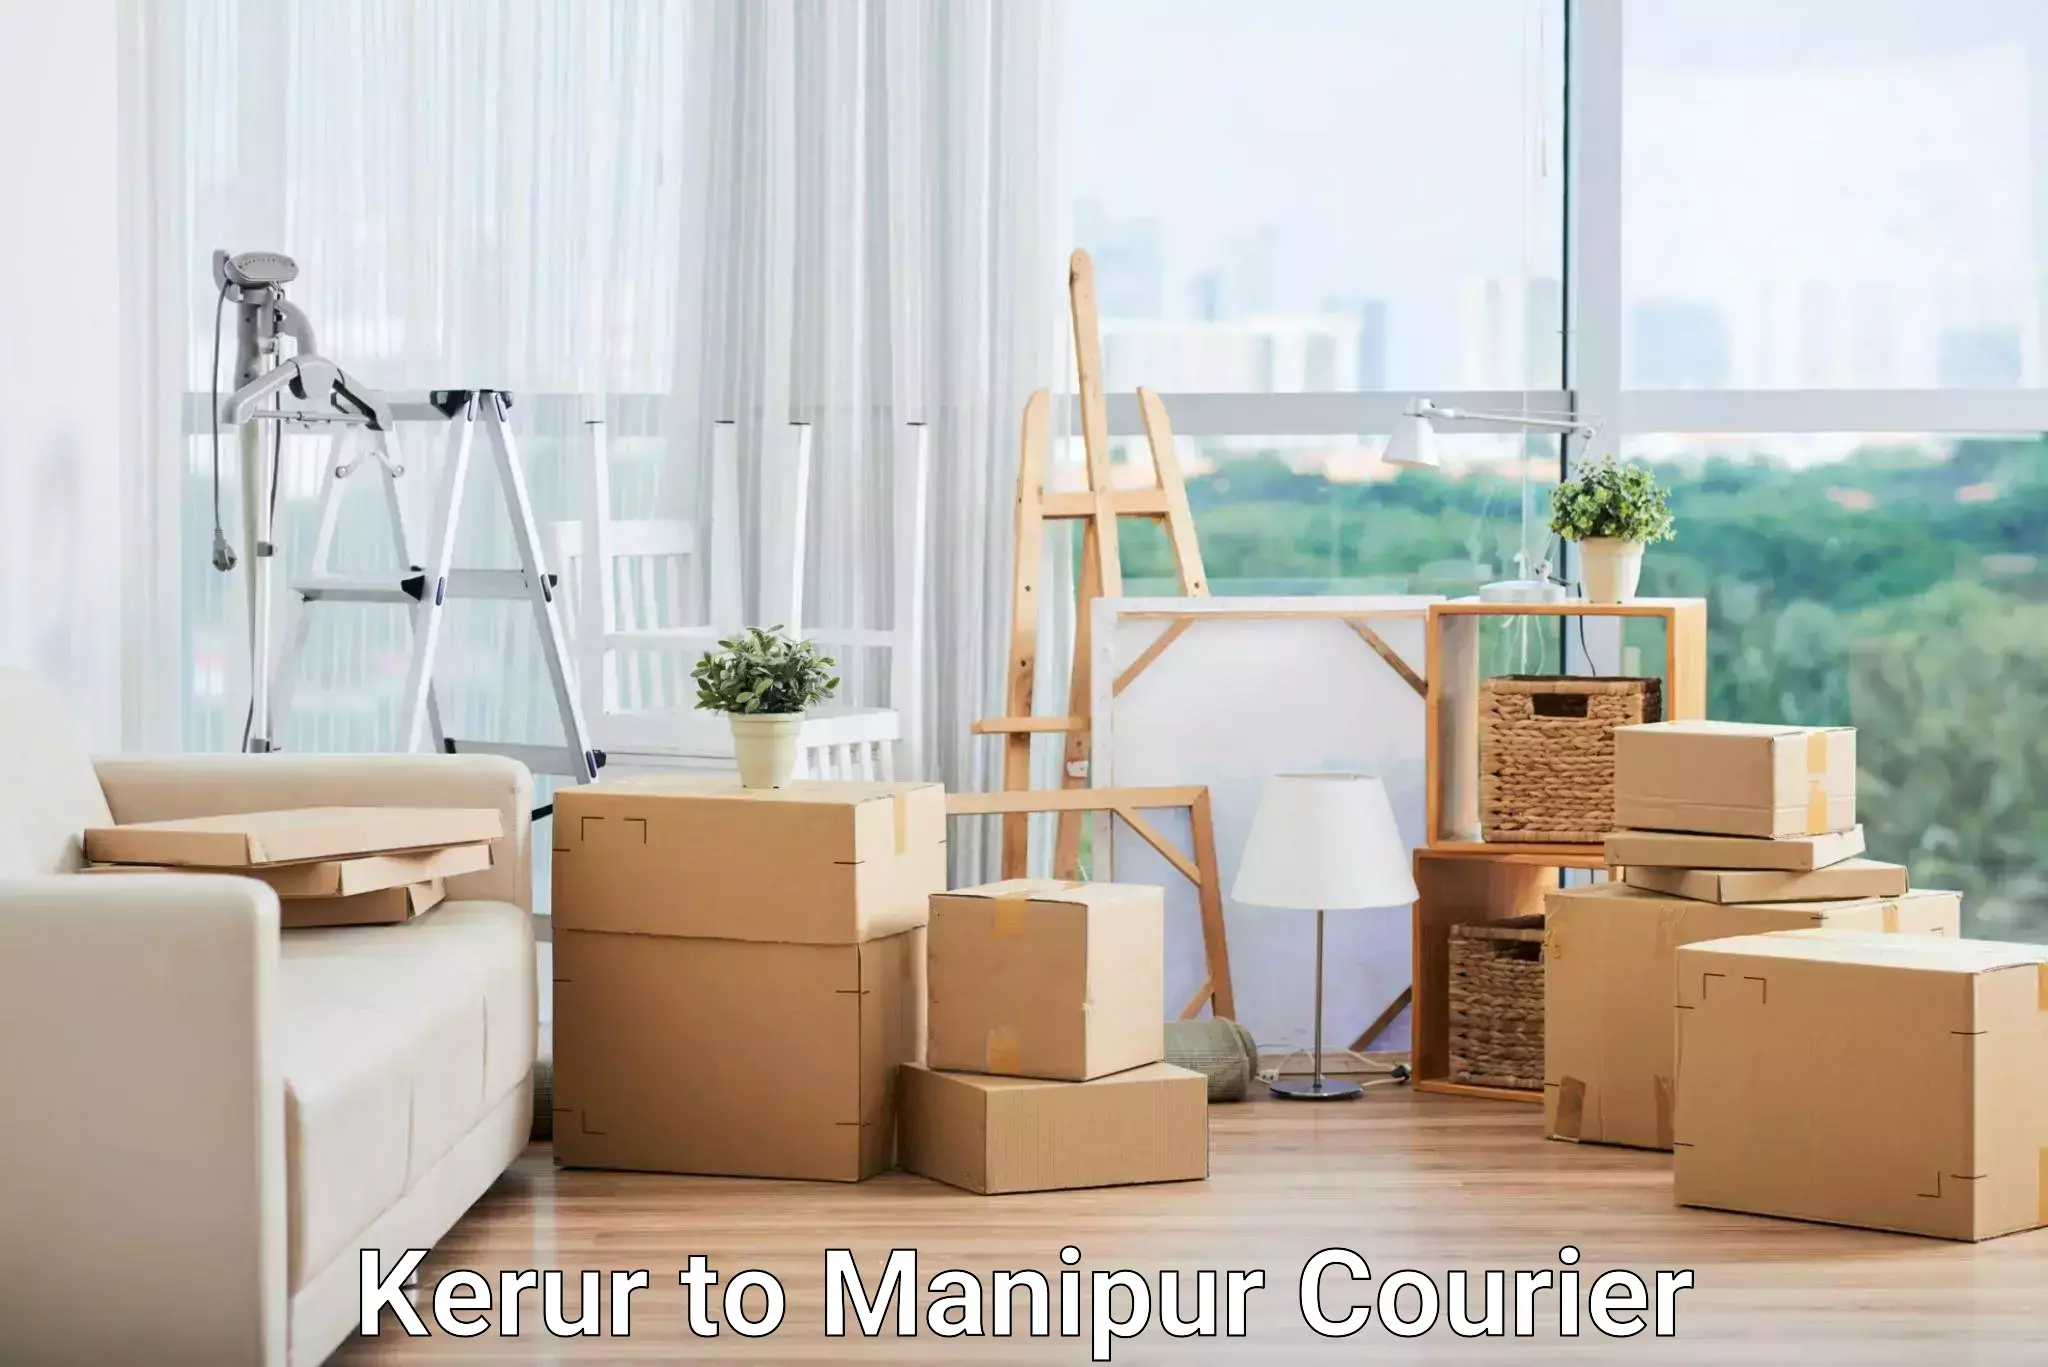 Seamless shipping experience Kerur to Manipur